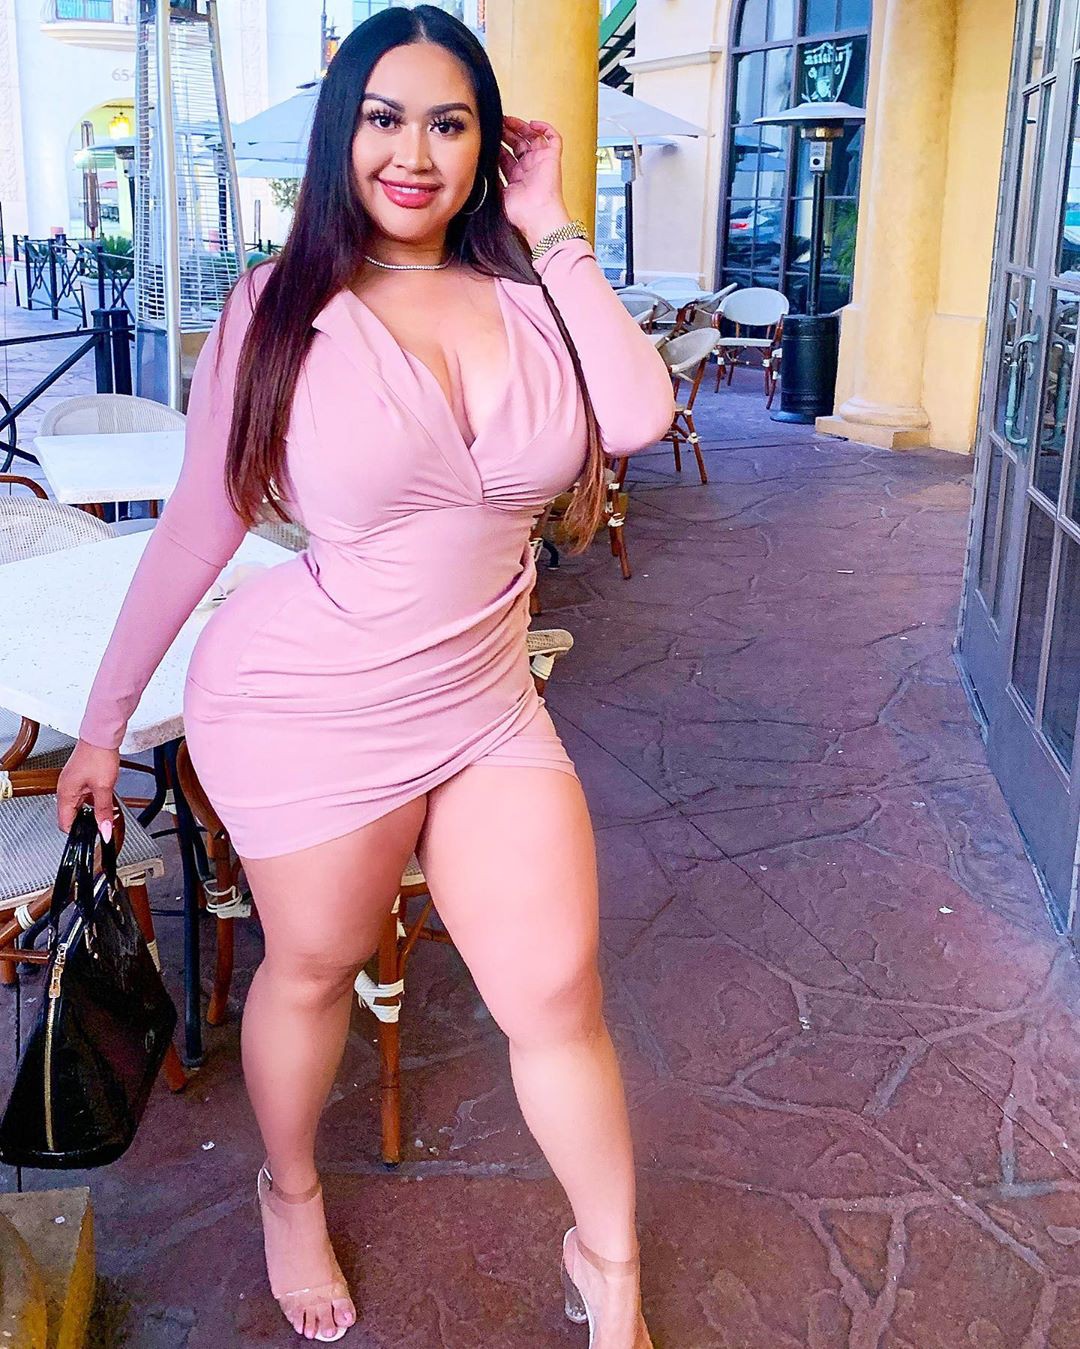 Tracy Lopez hot legs girls, sexy leg picture, Black Haircuts: Hot Girls,  Long hair,  Black hair,  Instagram Images Tracy Lopez  